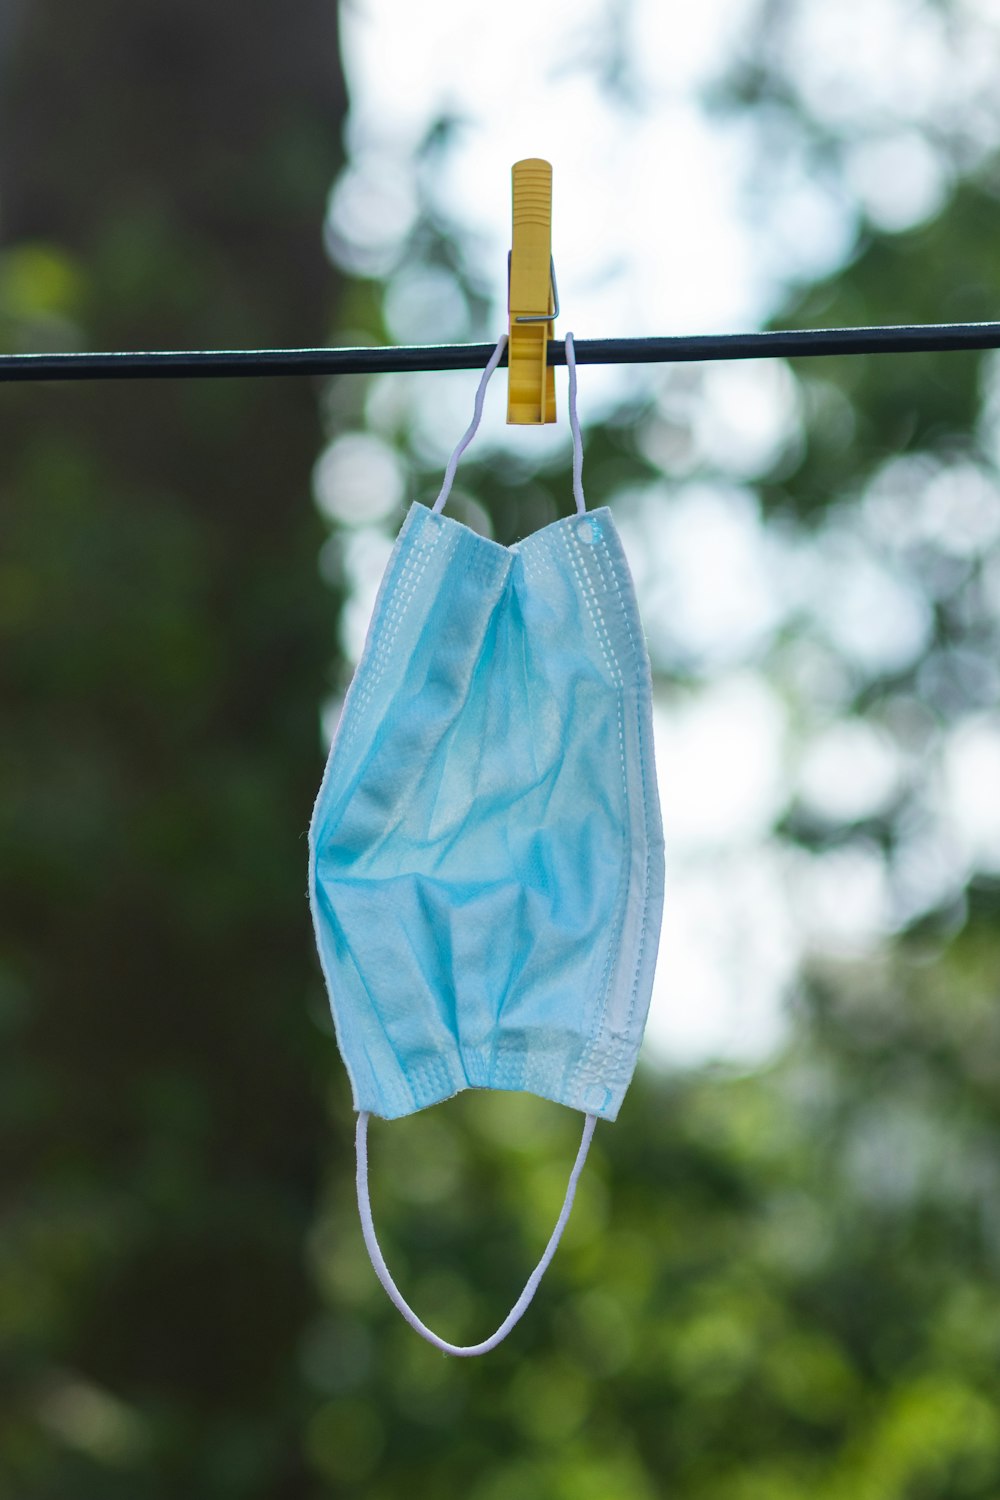 blue panty hanged on clothes hanger